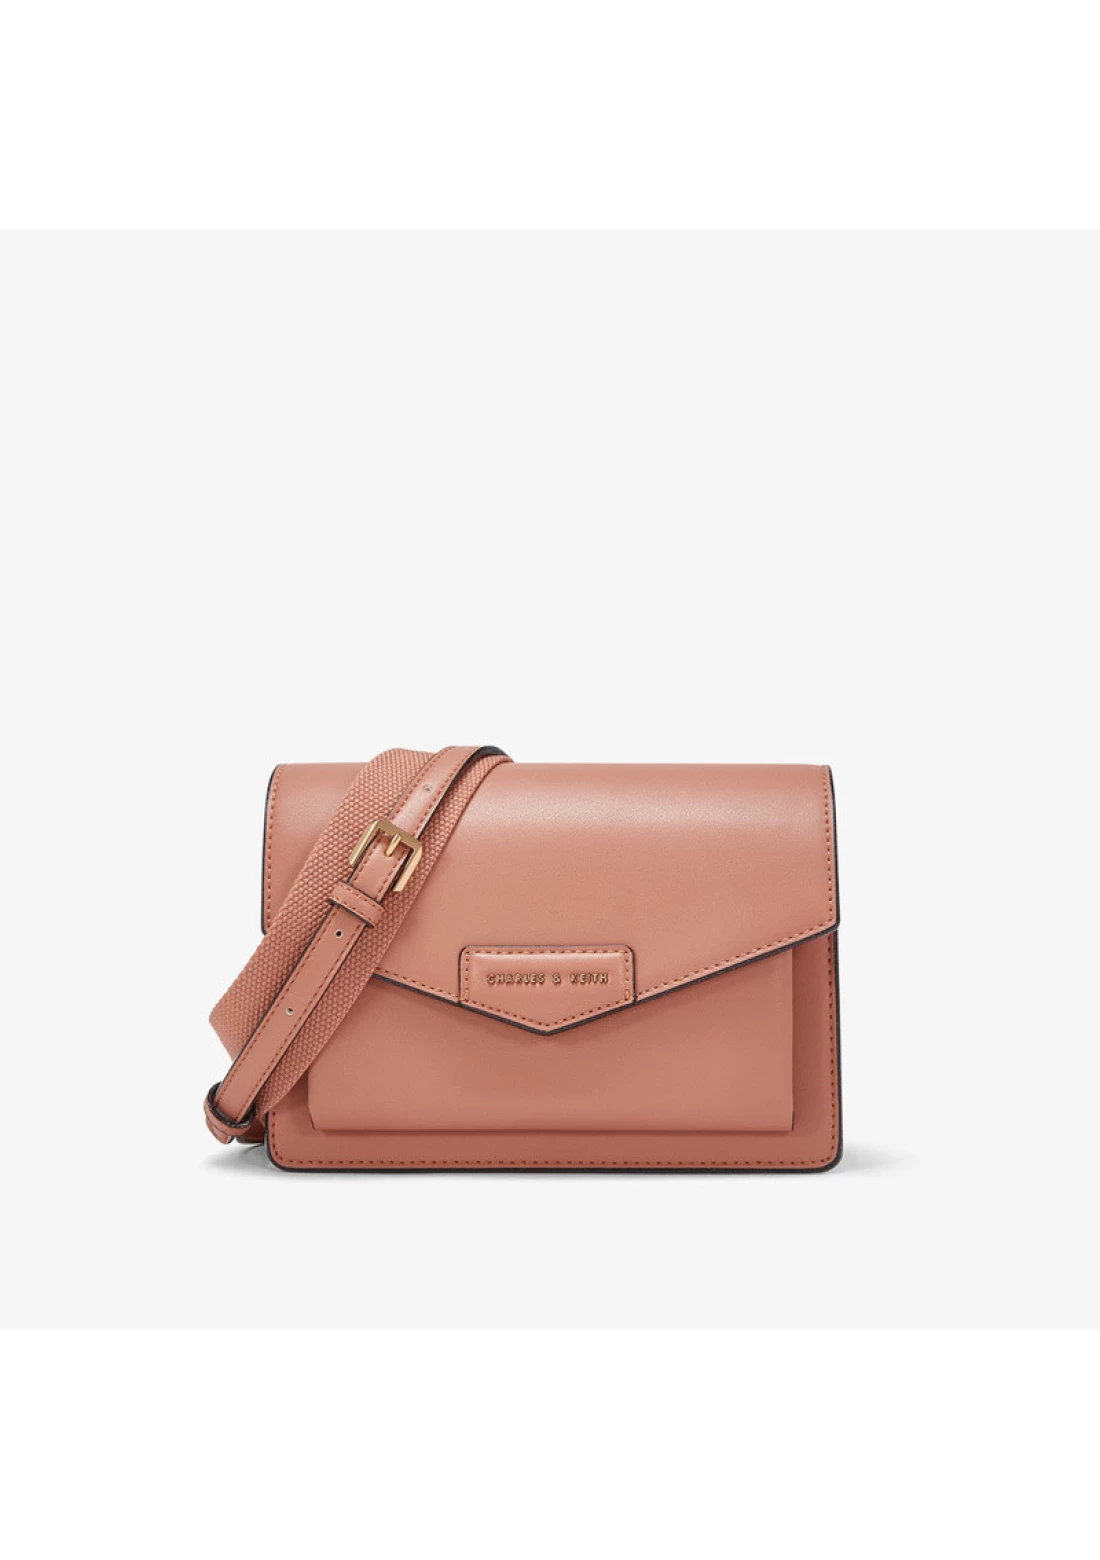 Charles Keith Messenger Bag Ladies Clamshell Messenger Bag Clay Up To 60%  Off